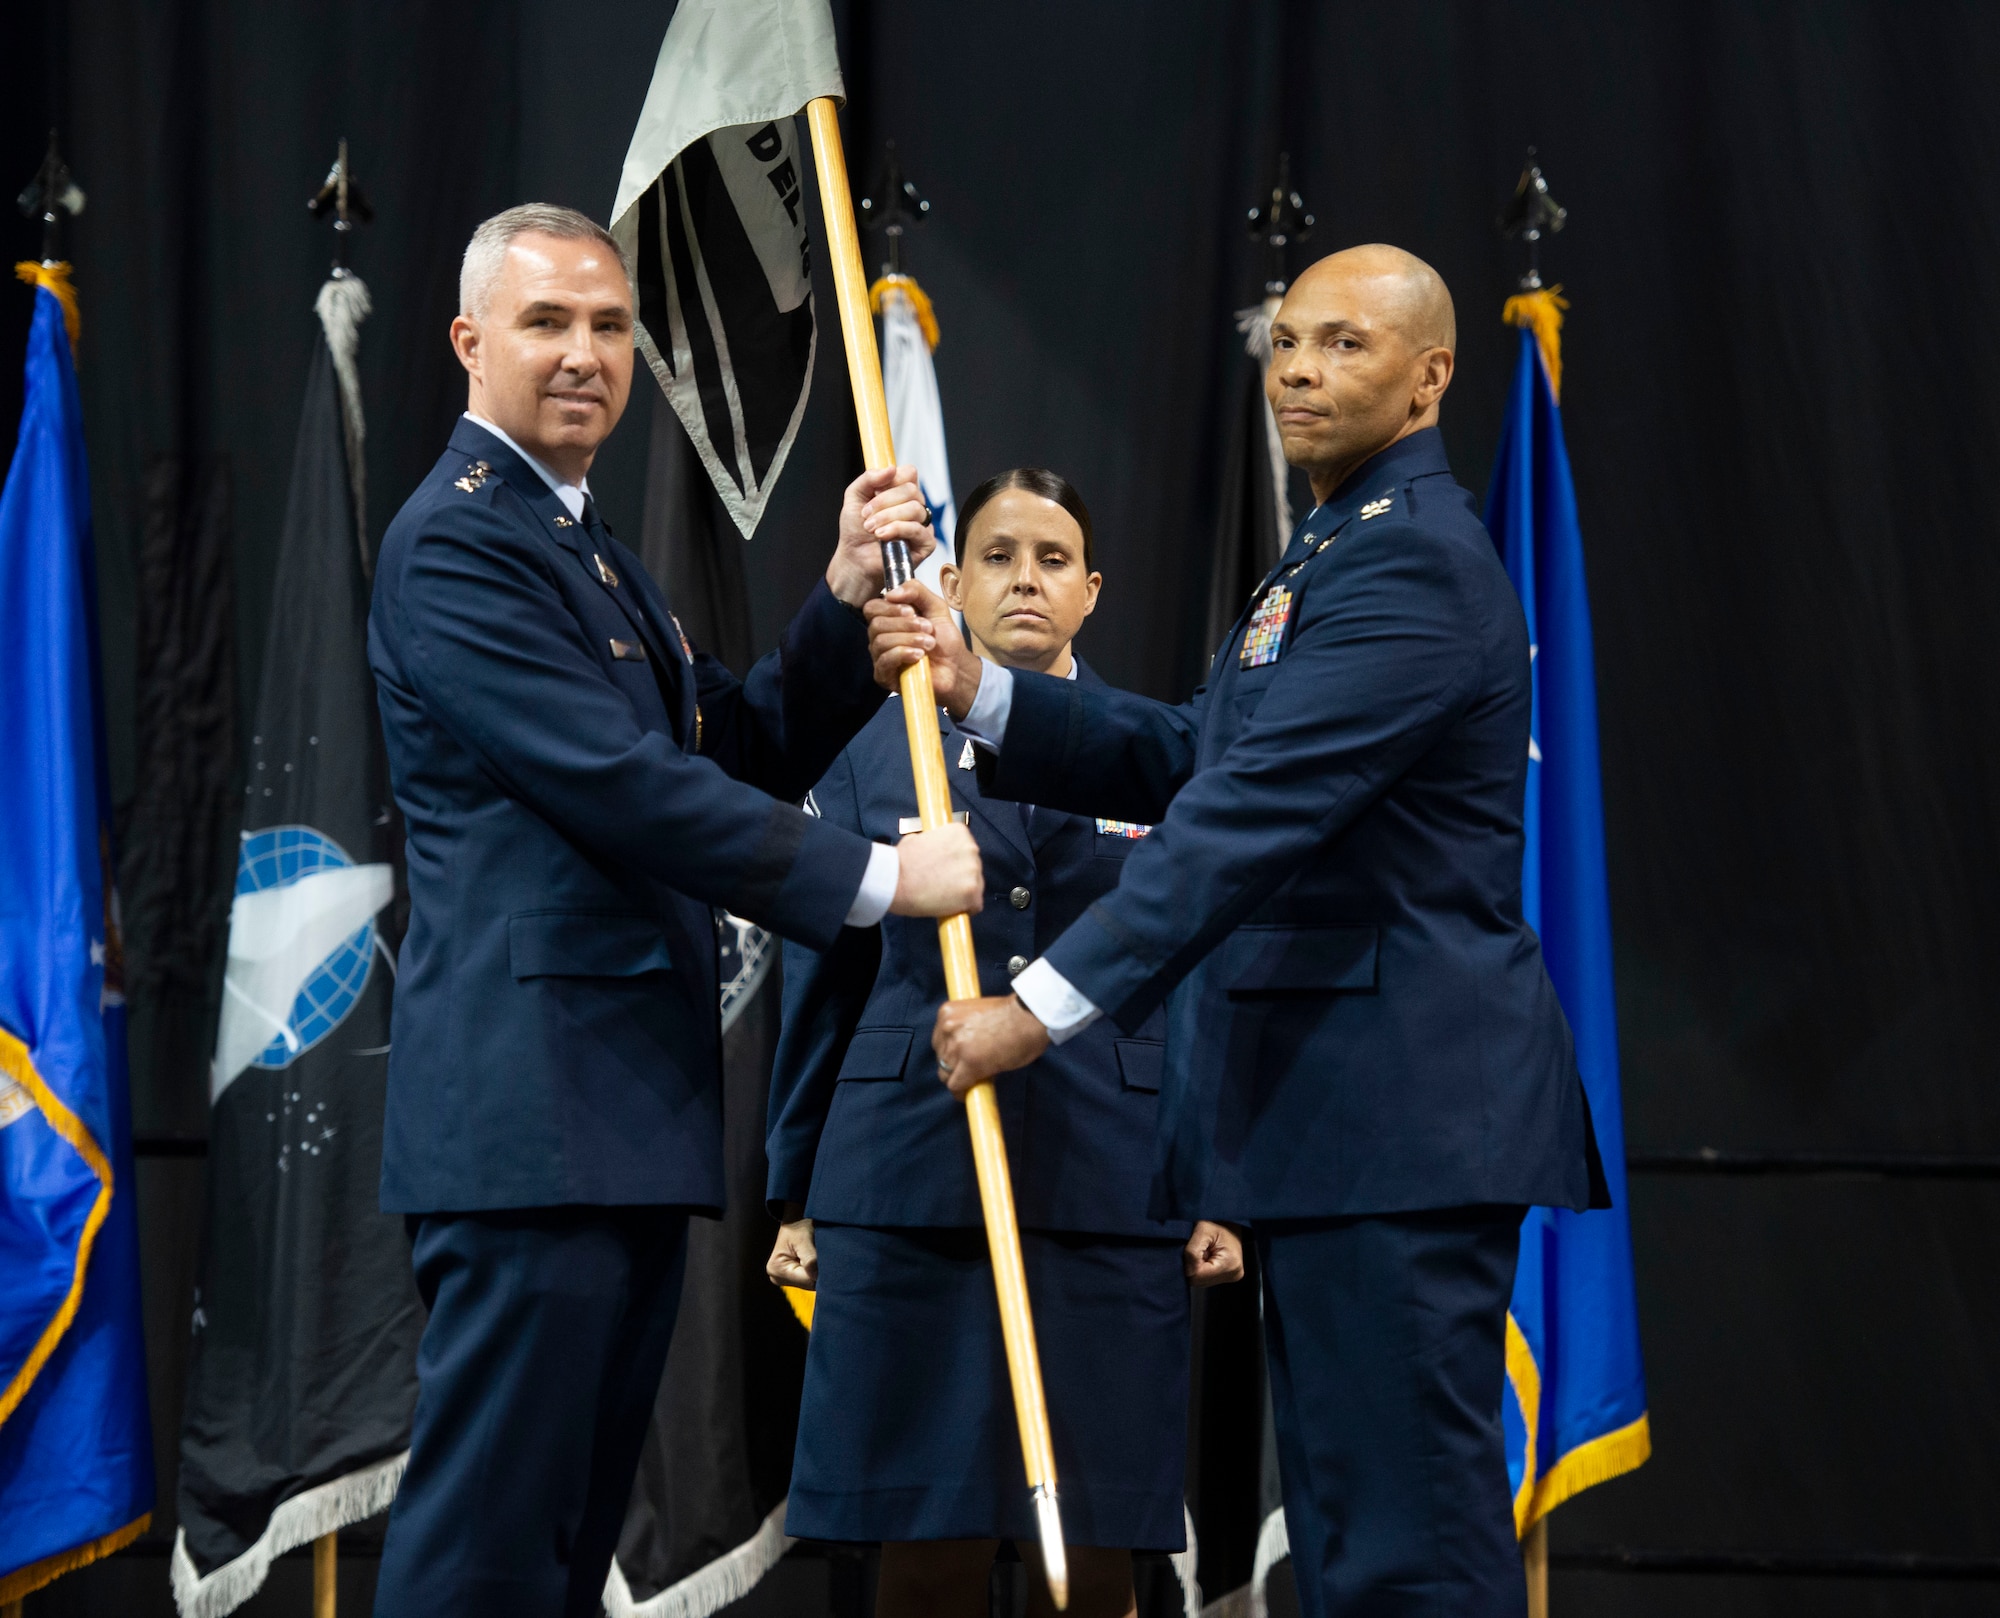 U.S. Space Force Colonel Marqus Randall, Space Delta 18 commander, takes Space Delta 18's guidon for the first time at the activation ceremony for Space Operations Command's newest Delta, Space Delta 18, and established the National Space Intelligence Center (NSIC) at the Nutter Center, Dayton, Ohio, June 24, 2022. Space Delta 18 is named in honor of the U.S. Space Force's role as the 18th member of the intelligence community. Delta 18 will deliver critical intelligence on threat systems, foreign intentions, and activities in the space domain to support national leaders, allies, partners and joint war fighters. (U.S. Space Force photo by SrA Jack Gardner)